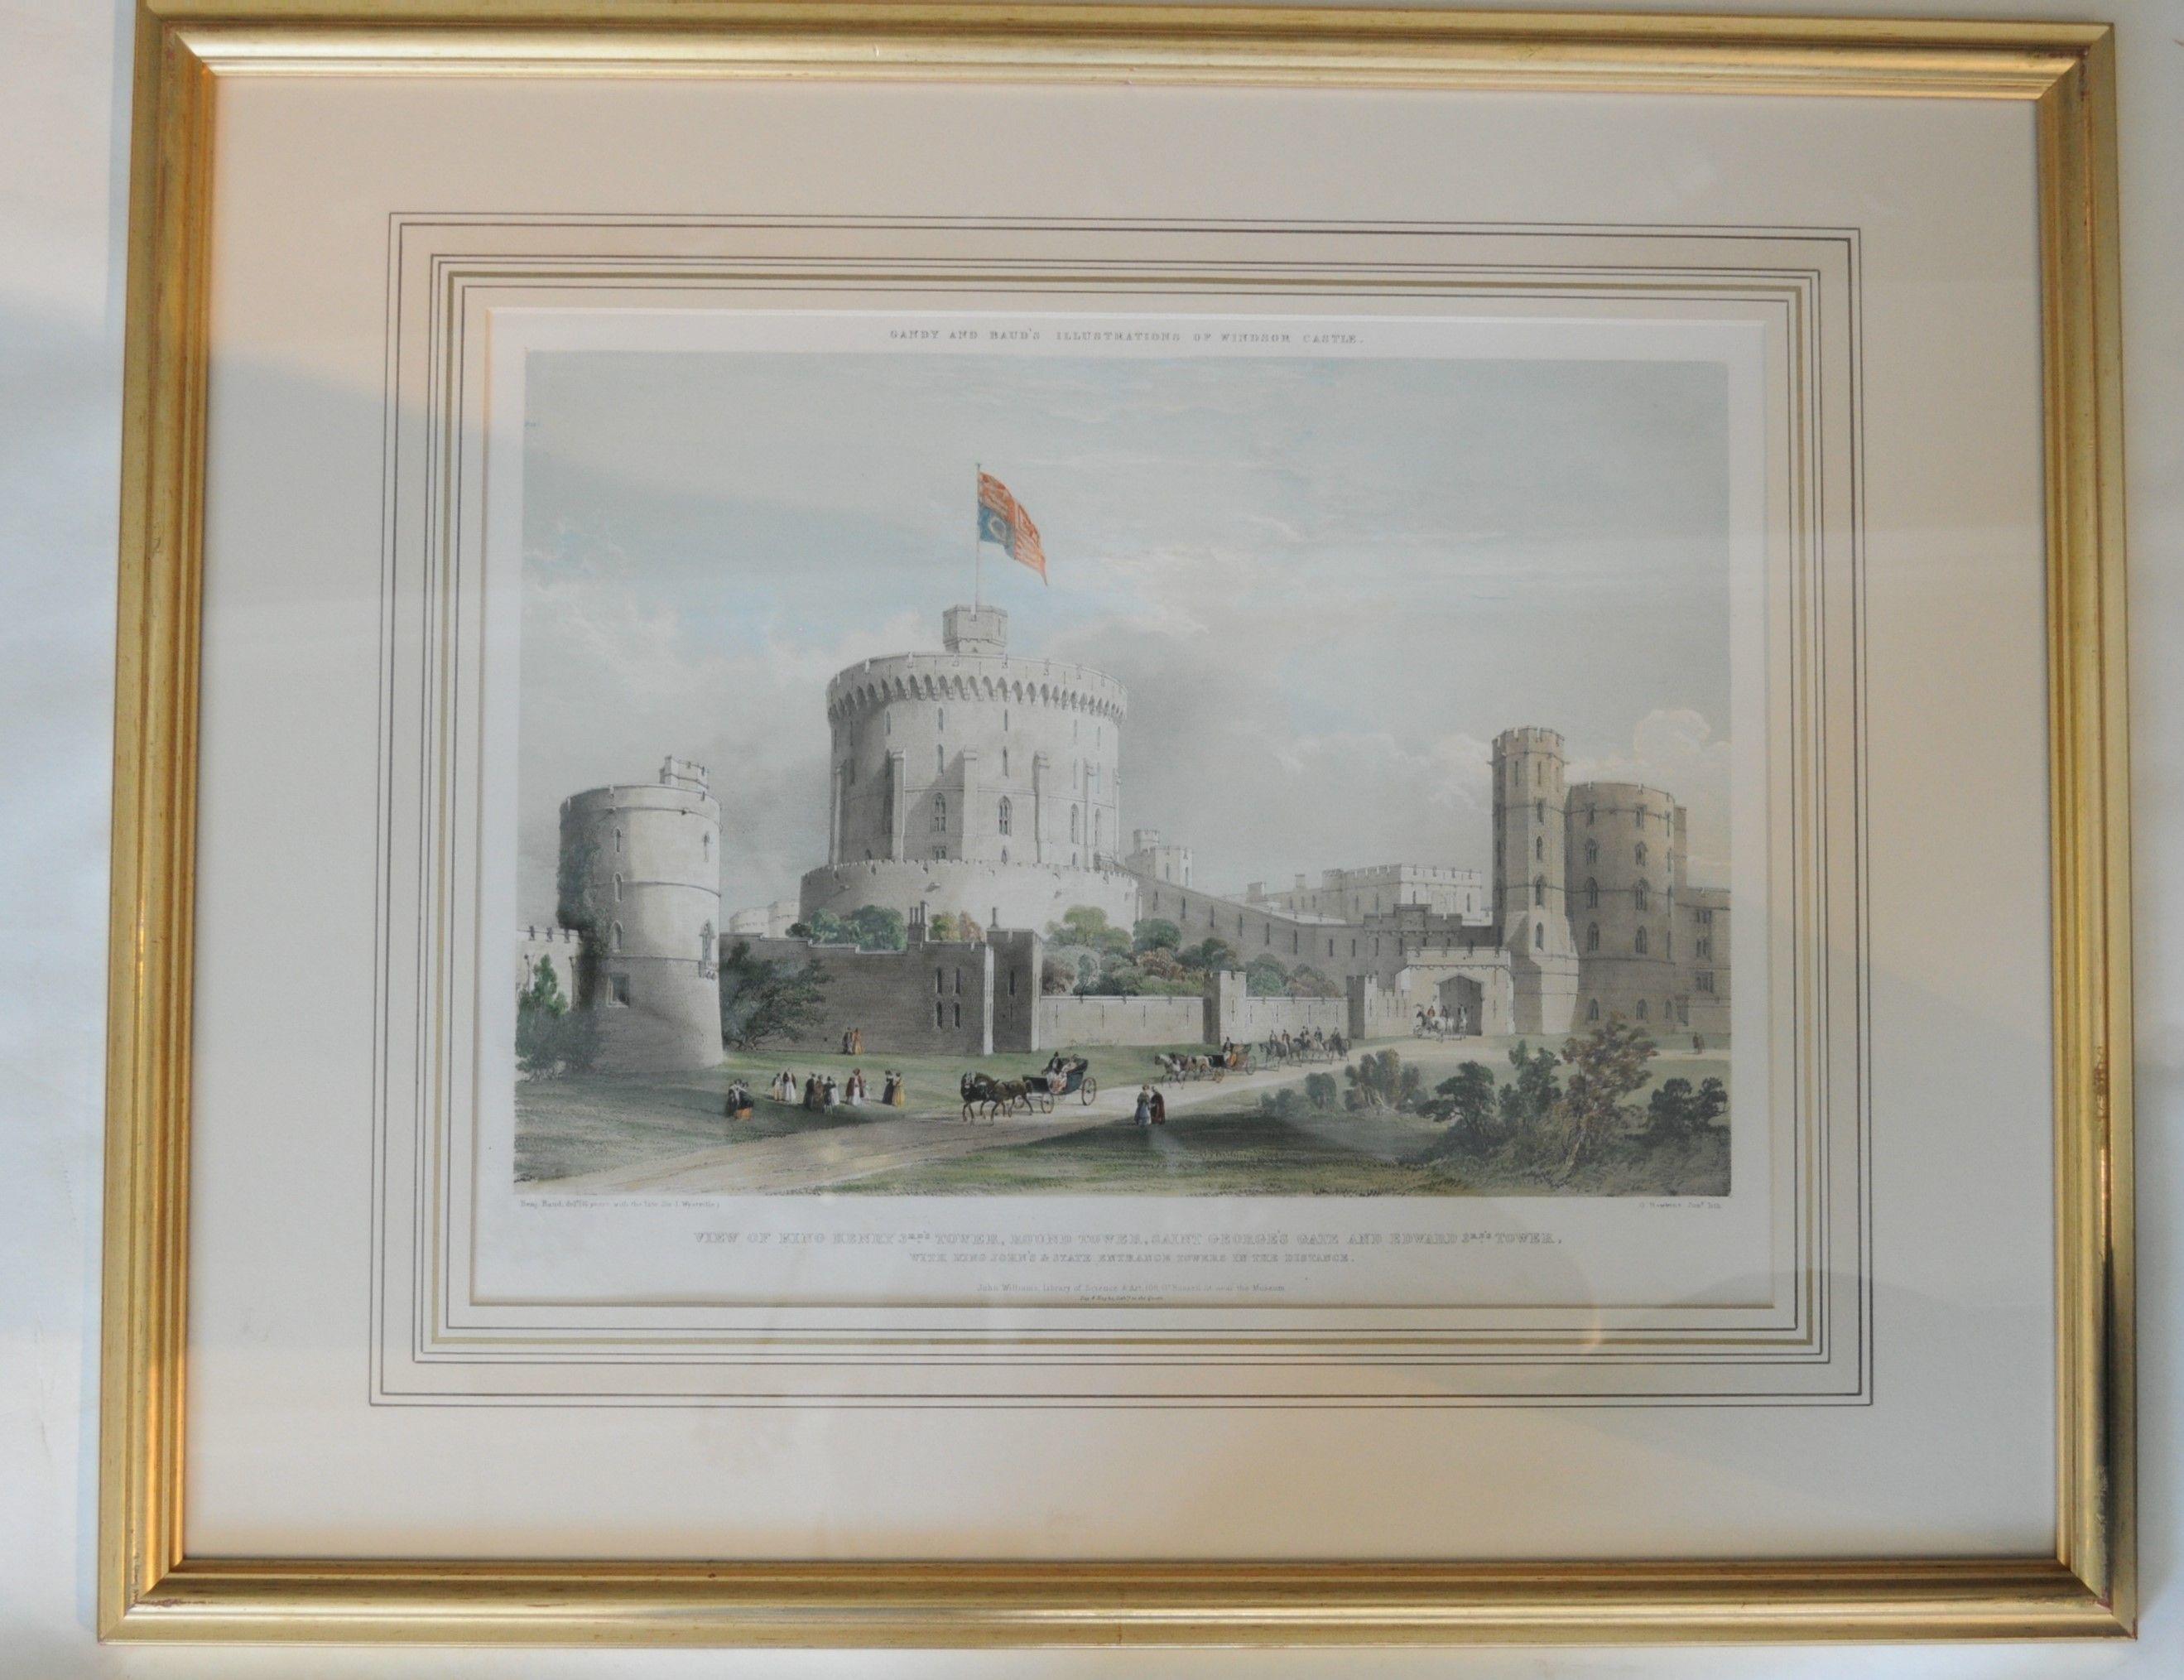 Rare set of six framed views of Windsor Castle, hand coloured lithographs, published in 1842 by Gandy & Baud for the Architectural Illustrations of Windsor Castle.
(Later hand colour, Modern mounts and frames).